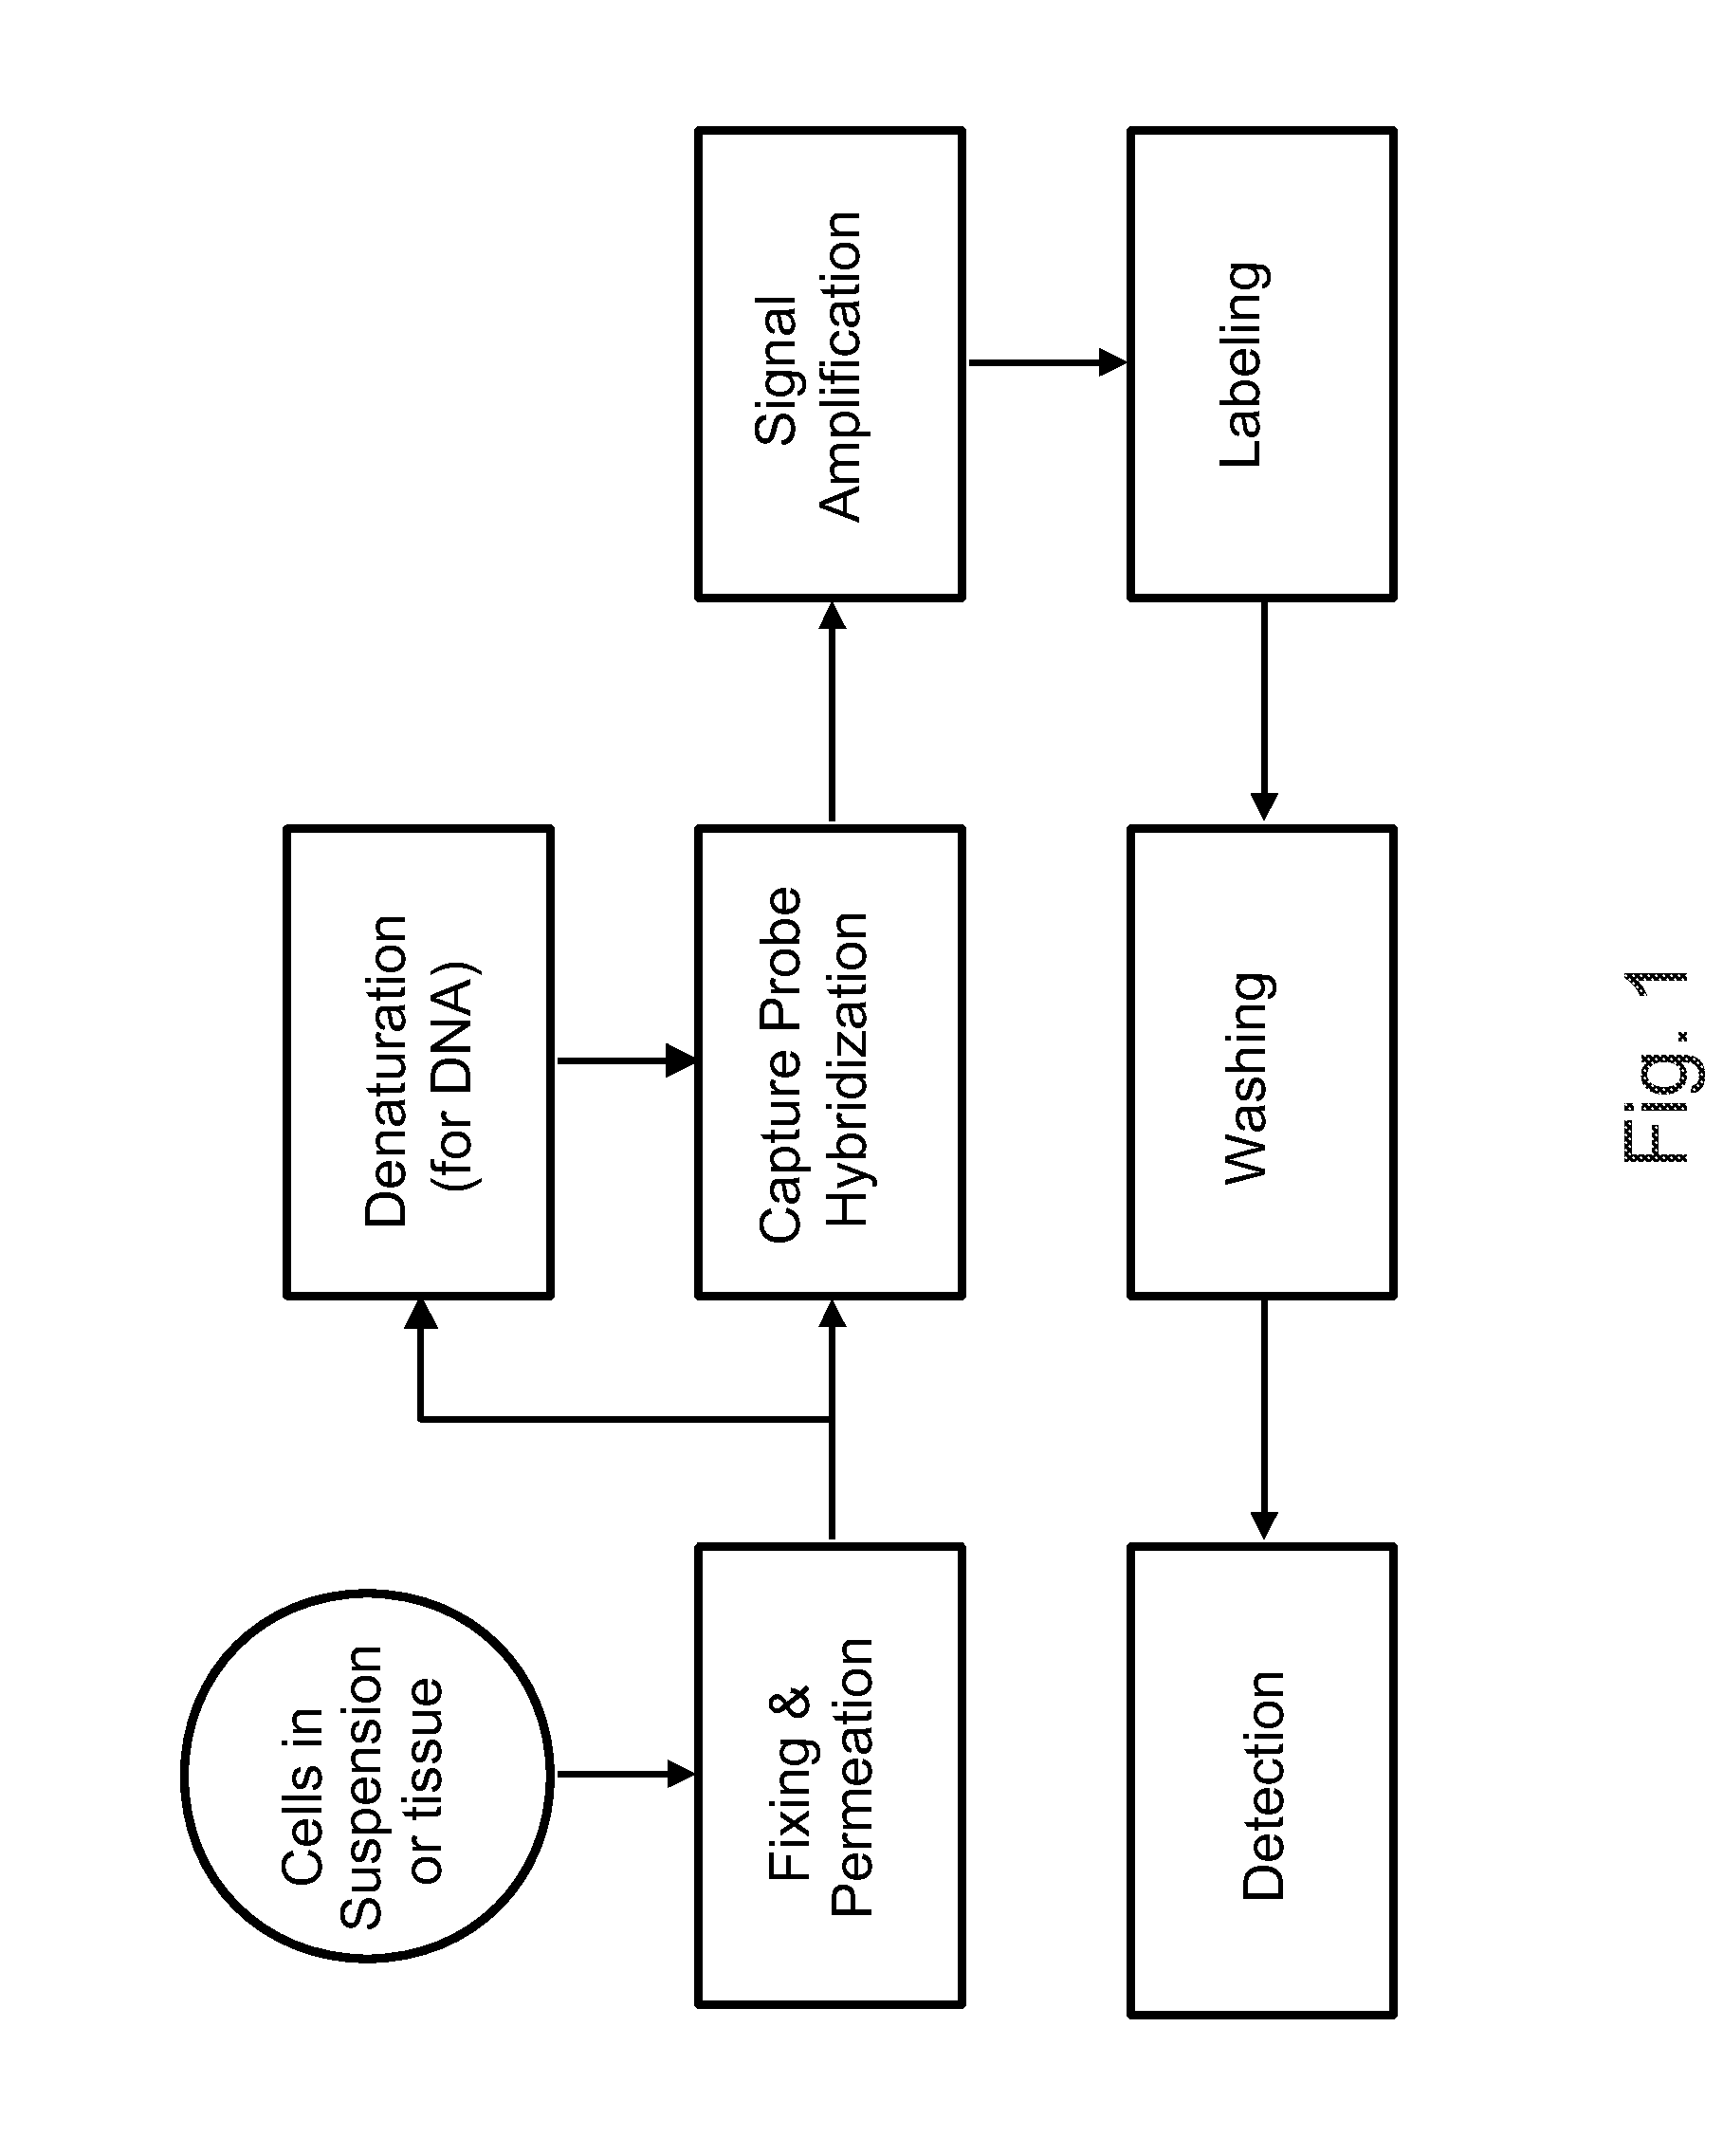 Methods of detecting nucleic acid sequences with high specificity